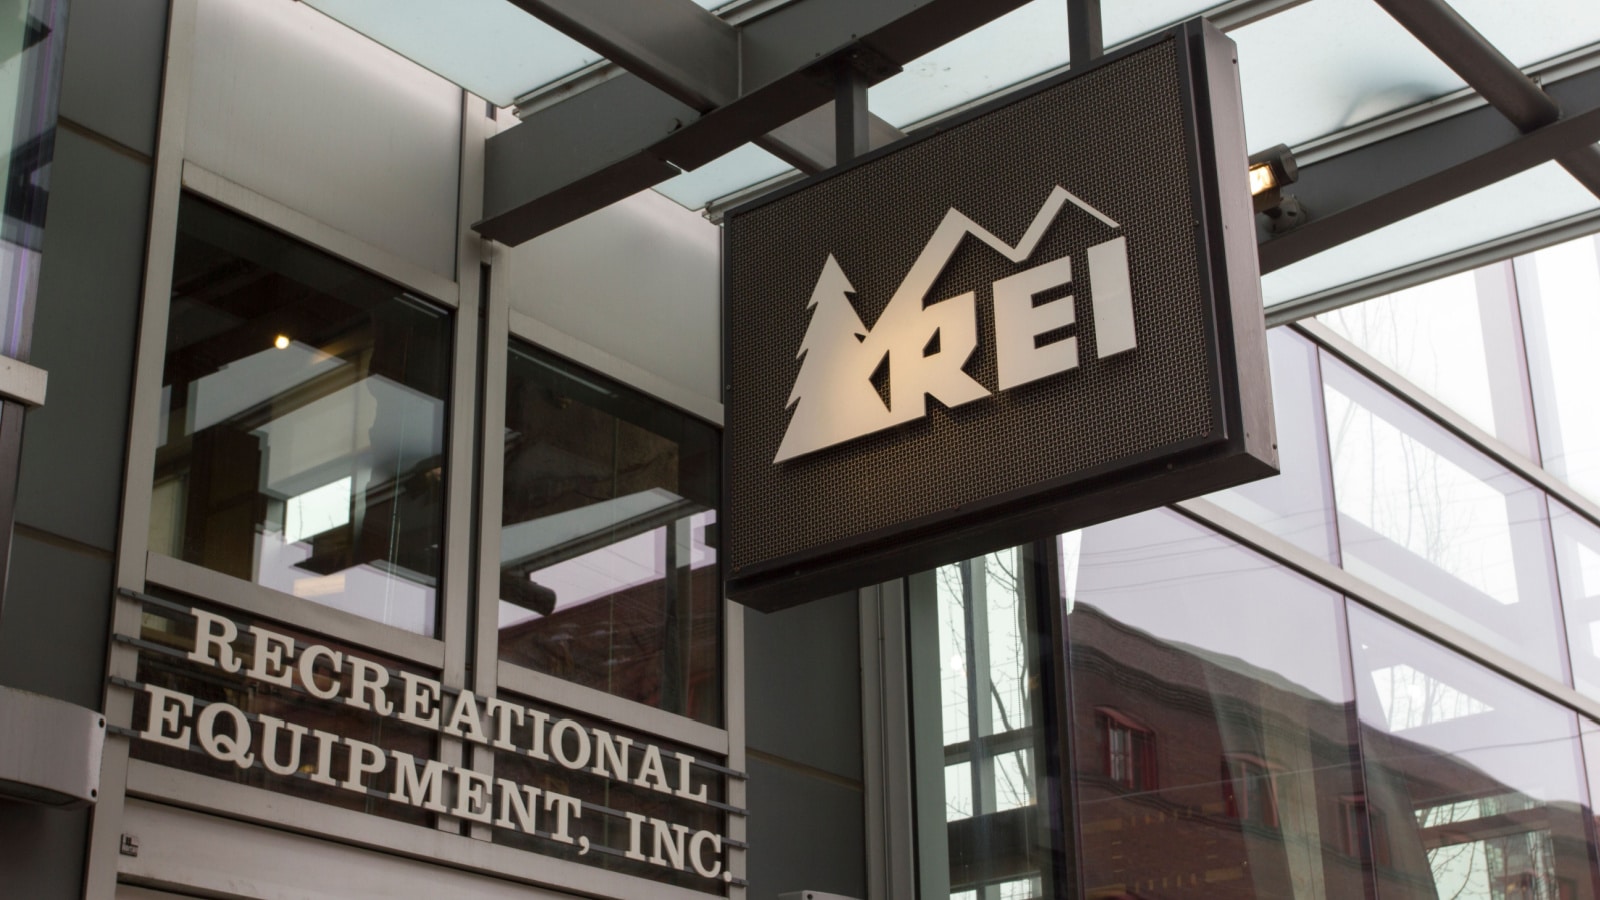 Portland, Oregon - Feb 8, 2019: The REI sign at the entrance of its store in Portland. Recreational Equipment, Inc. is an American retail and outdoor recreation services corporation.